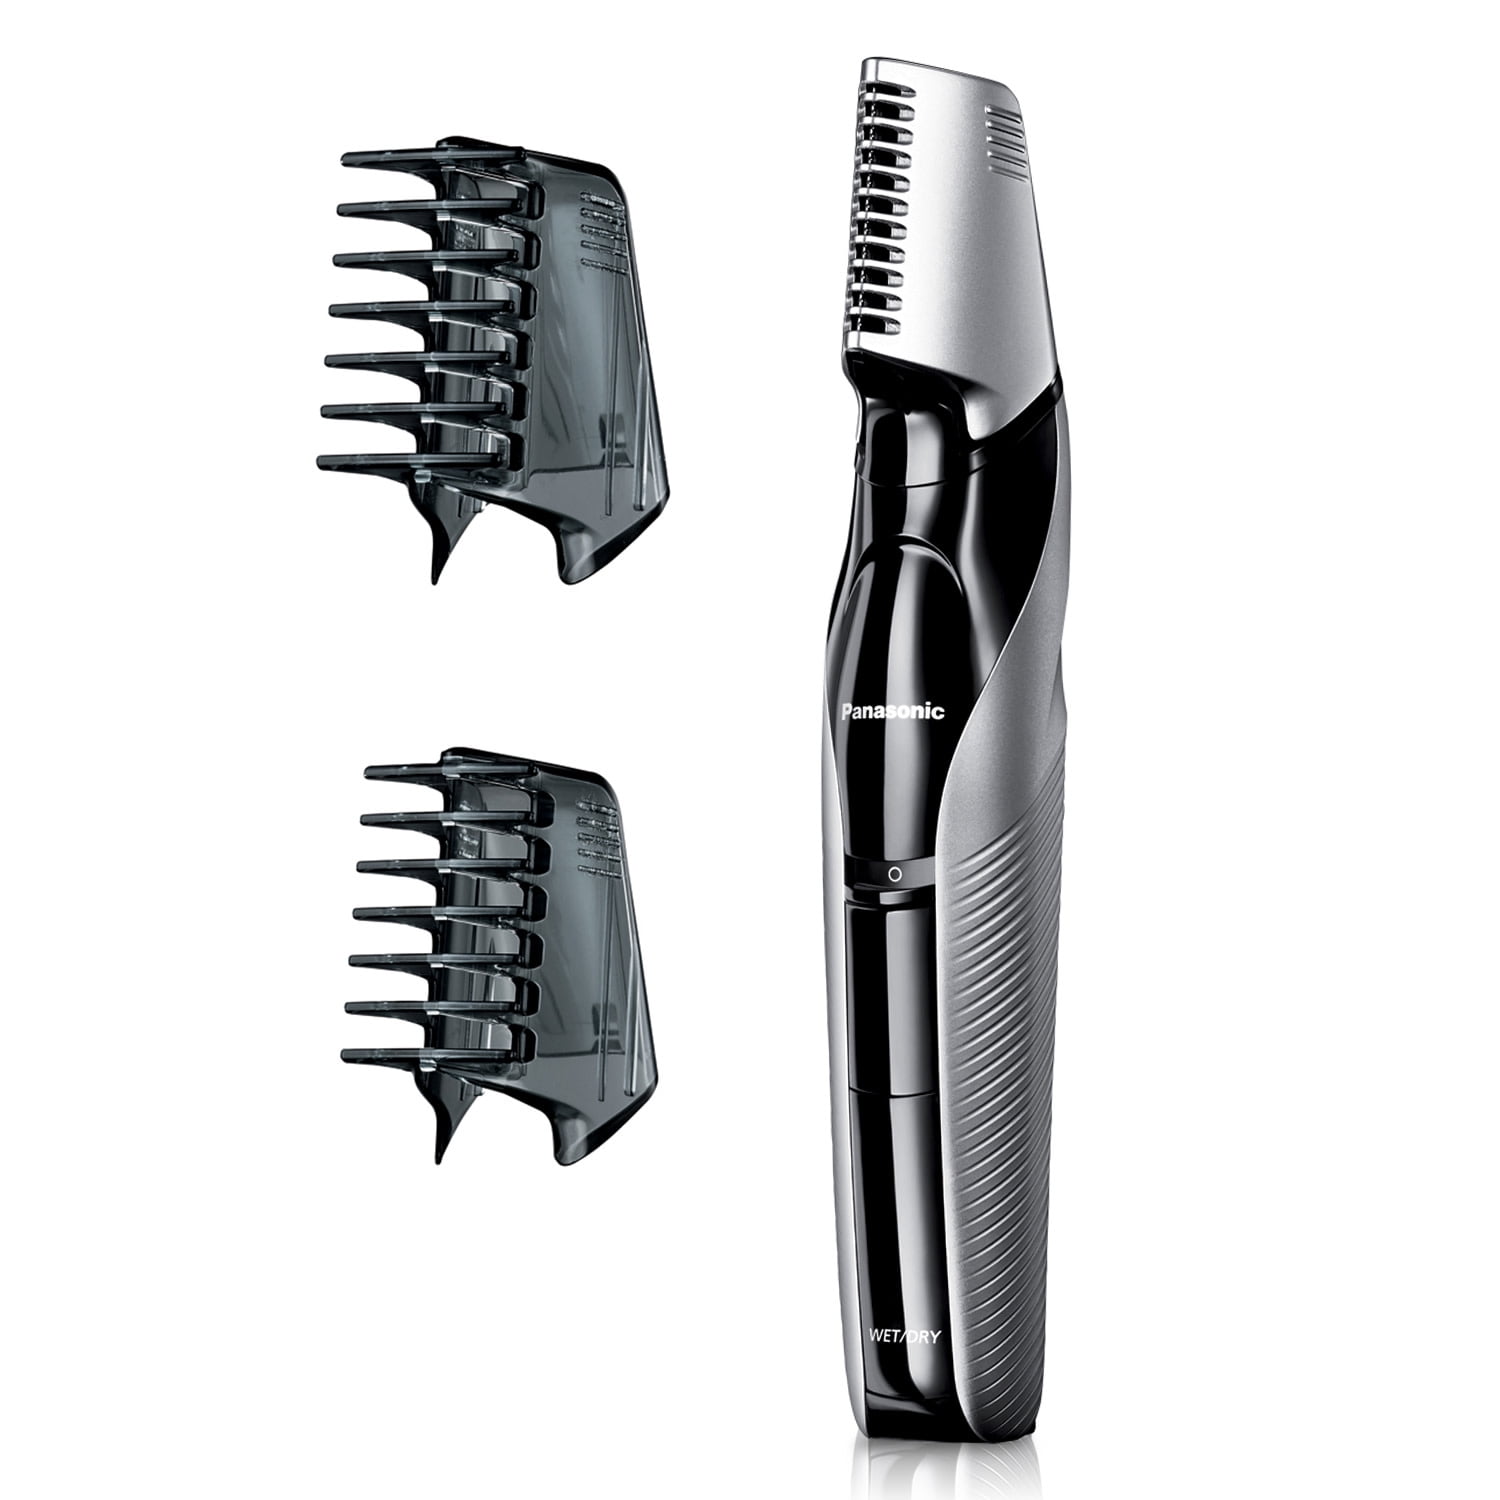 Panasonic Body Hair Trimmer, Waterproof Design, V-Shaped Trimmer Head with  3 Comb Attachments for Gentle, Full Body Grooming, ER-GK60-S 